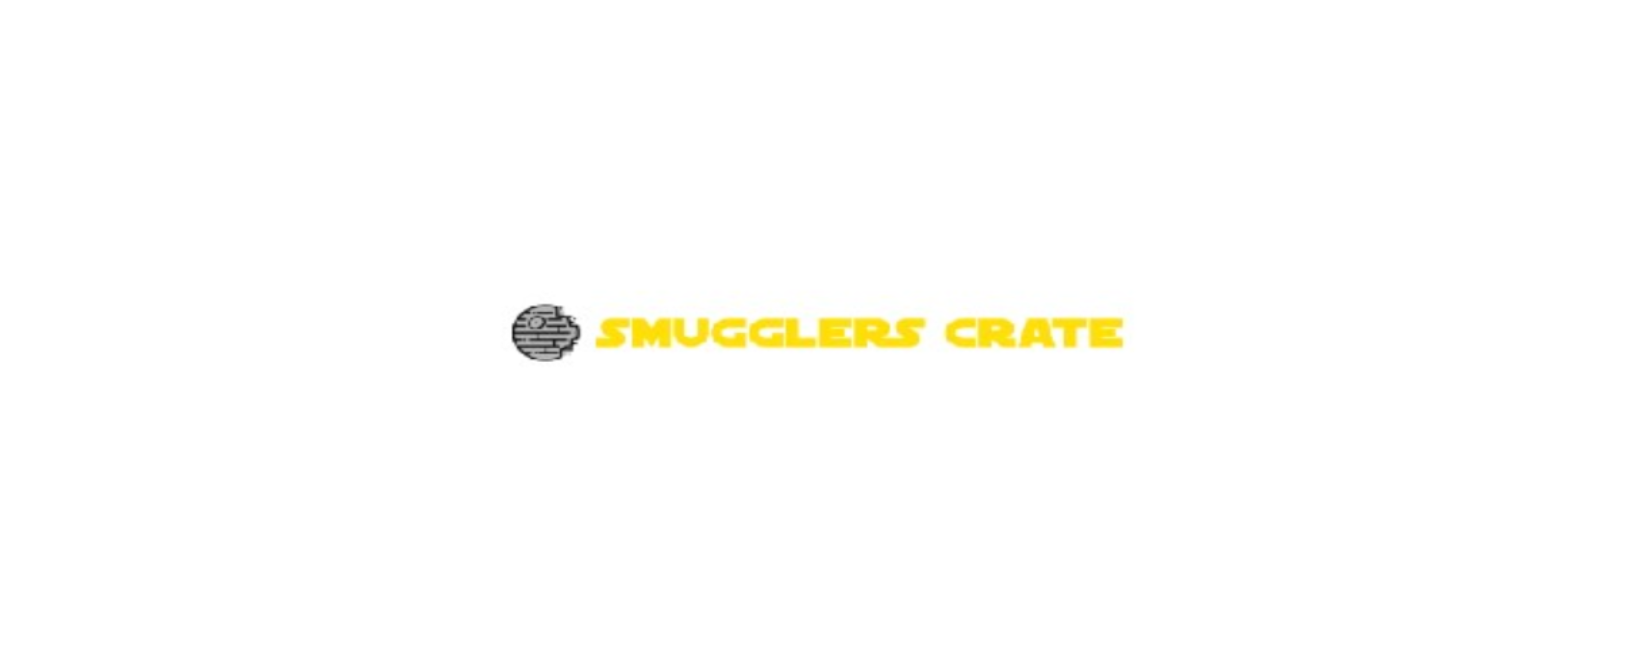 Smugglers Crate Discount Code 2023